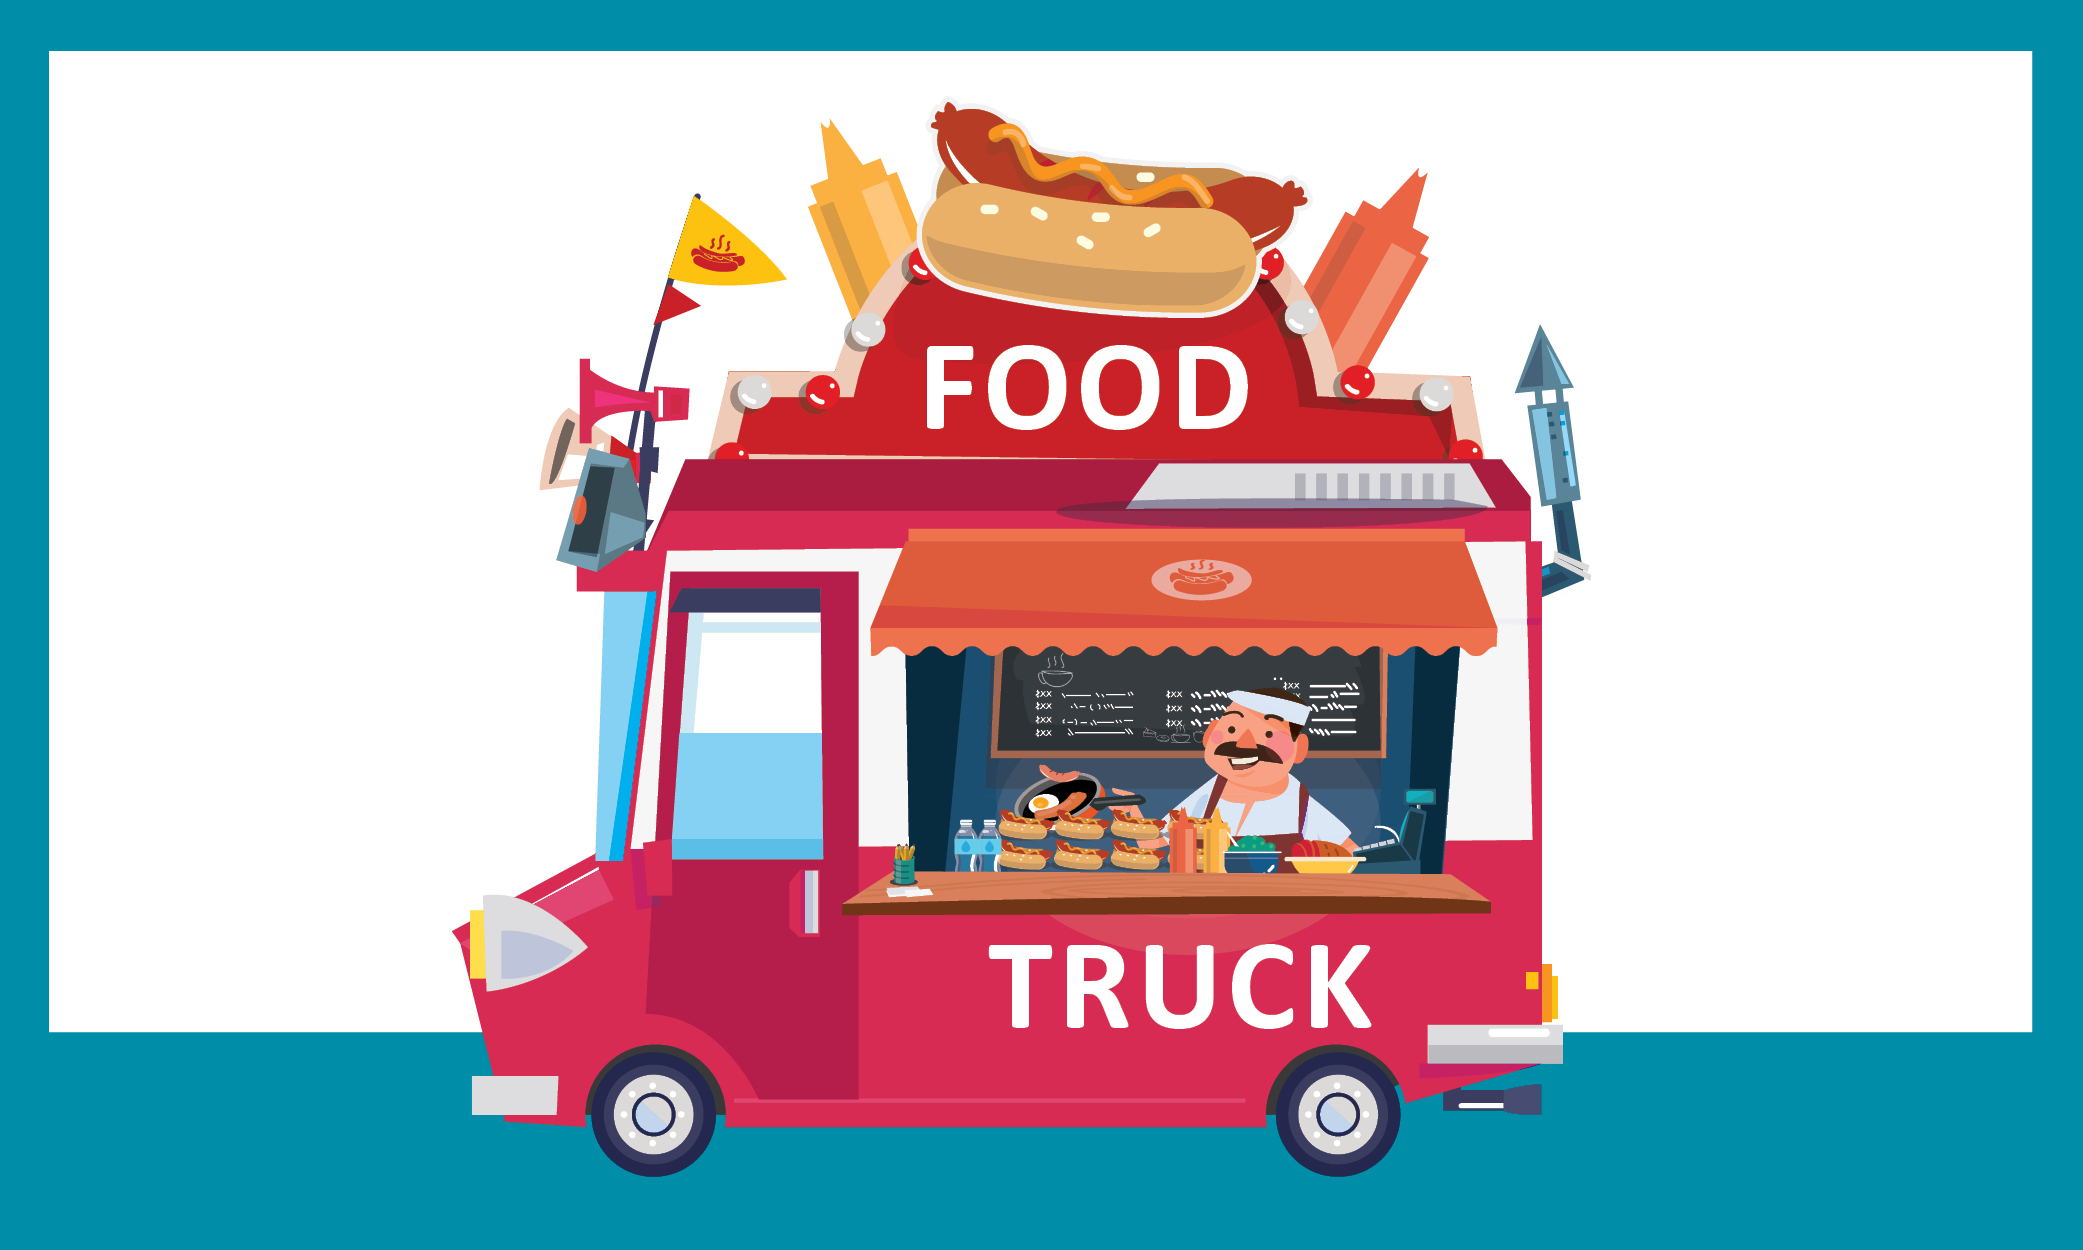 Step 3 – Plan for Production (food truck)